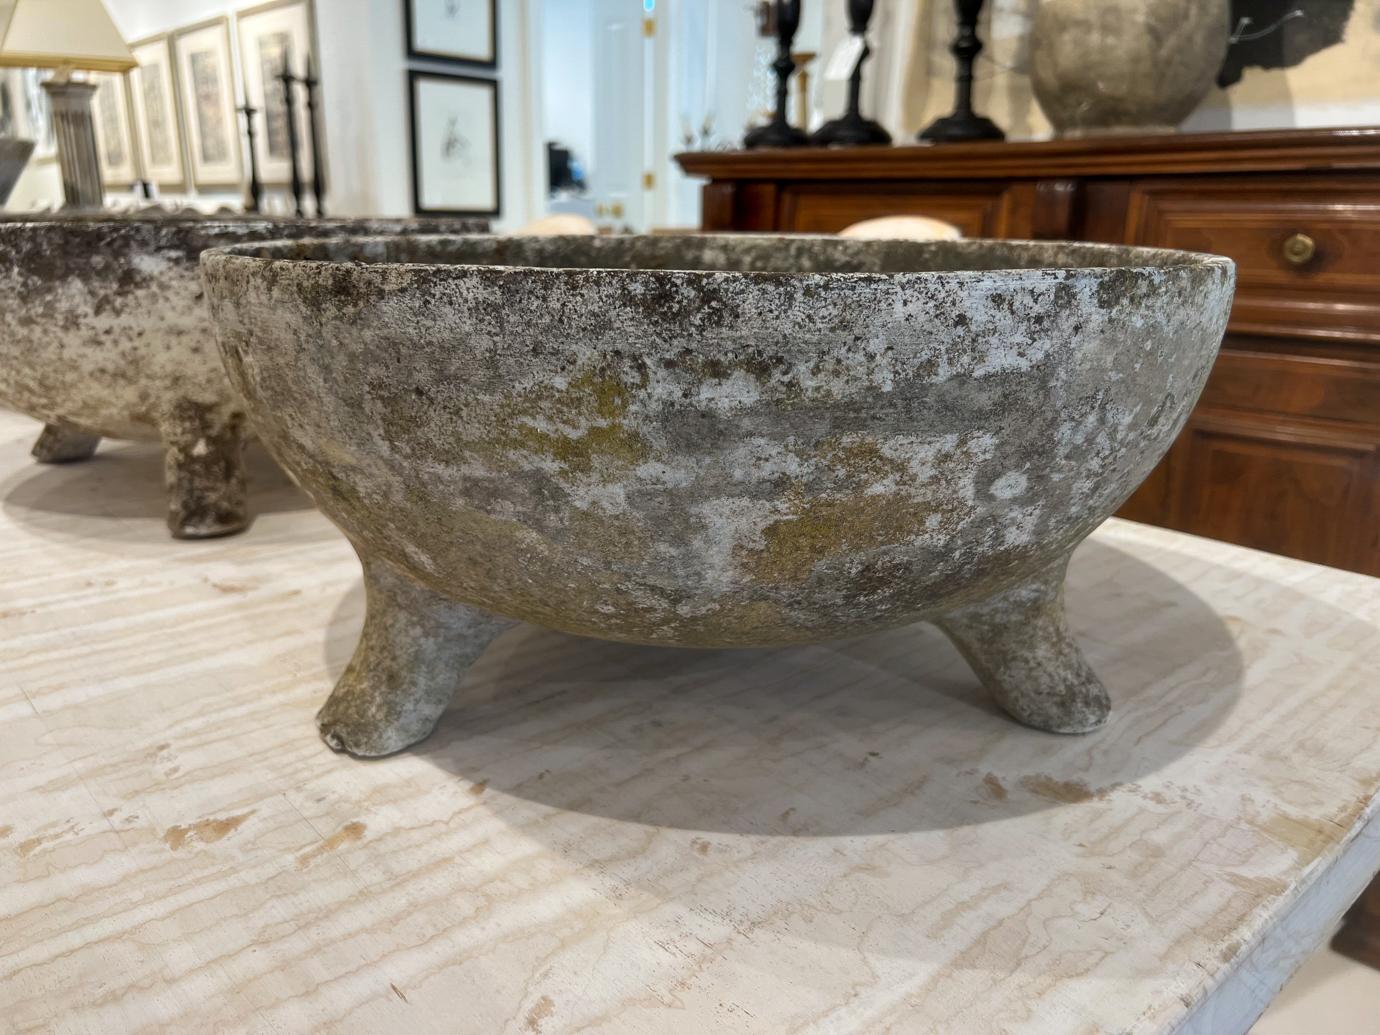 Willy Guhl was a famous Swiss designer who created planters in many shapes. These are formed from a slab of Eternit (a fibrous concrete material) moulded into a bowl with feet.
 